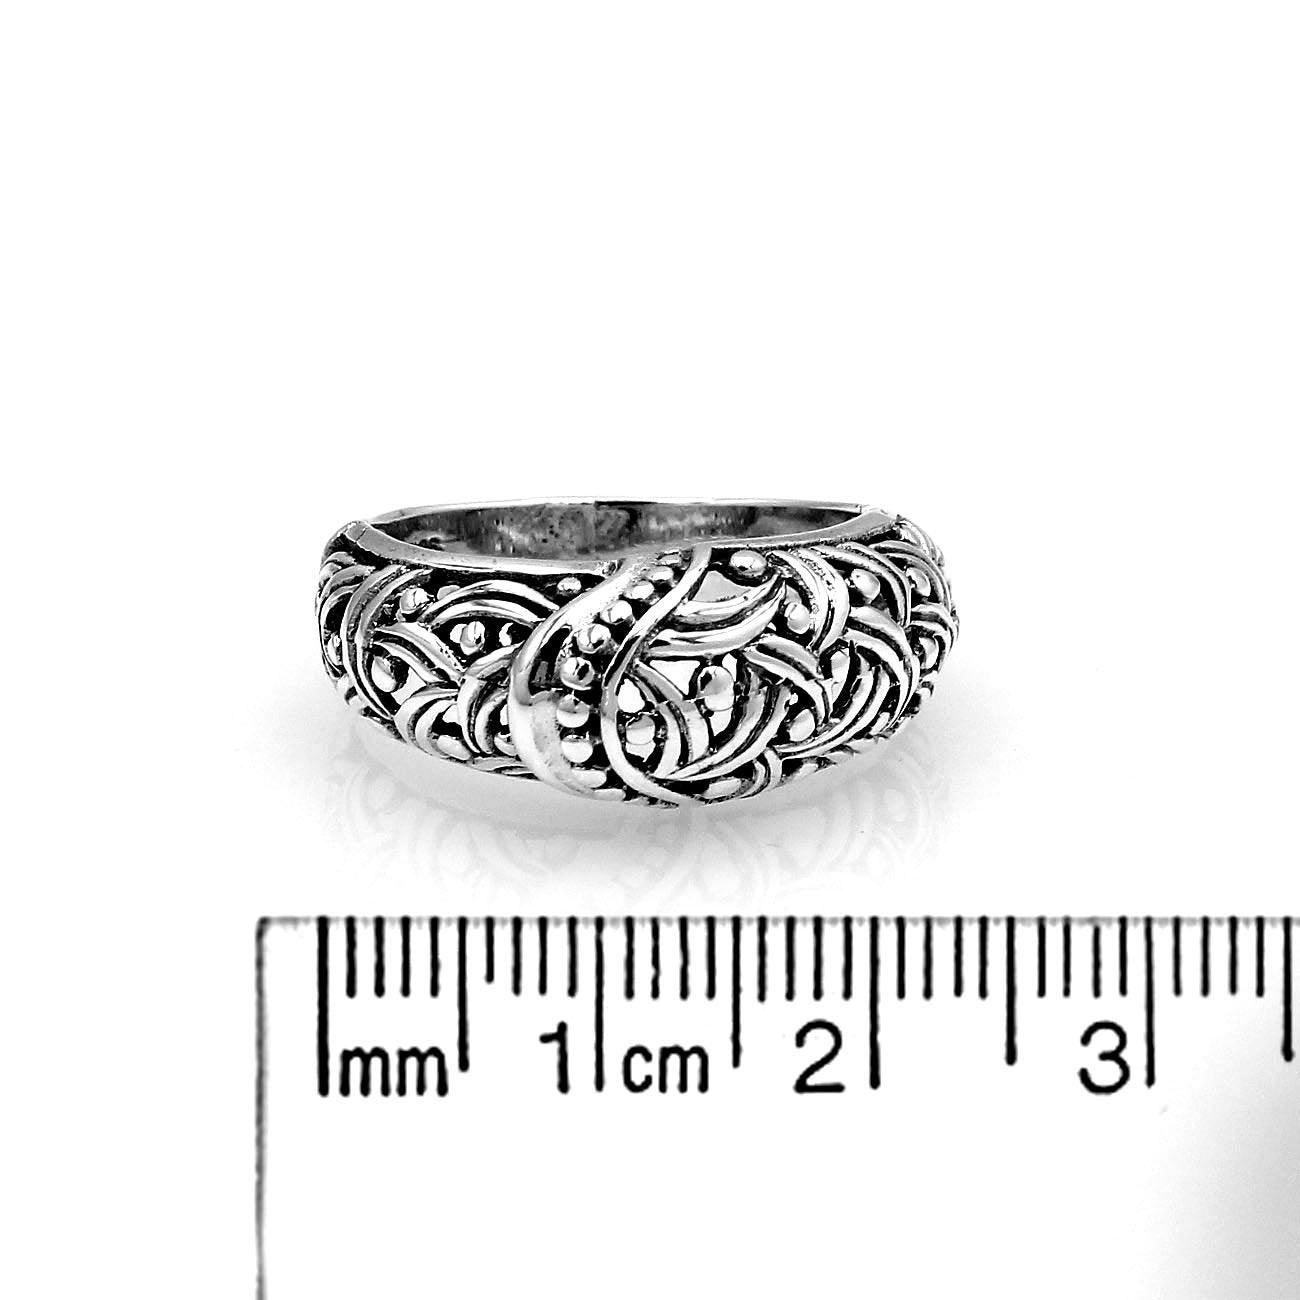 Designer Handmade BAND Ring in 925 Sterling Silver - Size L , M , N , O , P , Q - Inspiring Jewellery